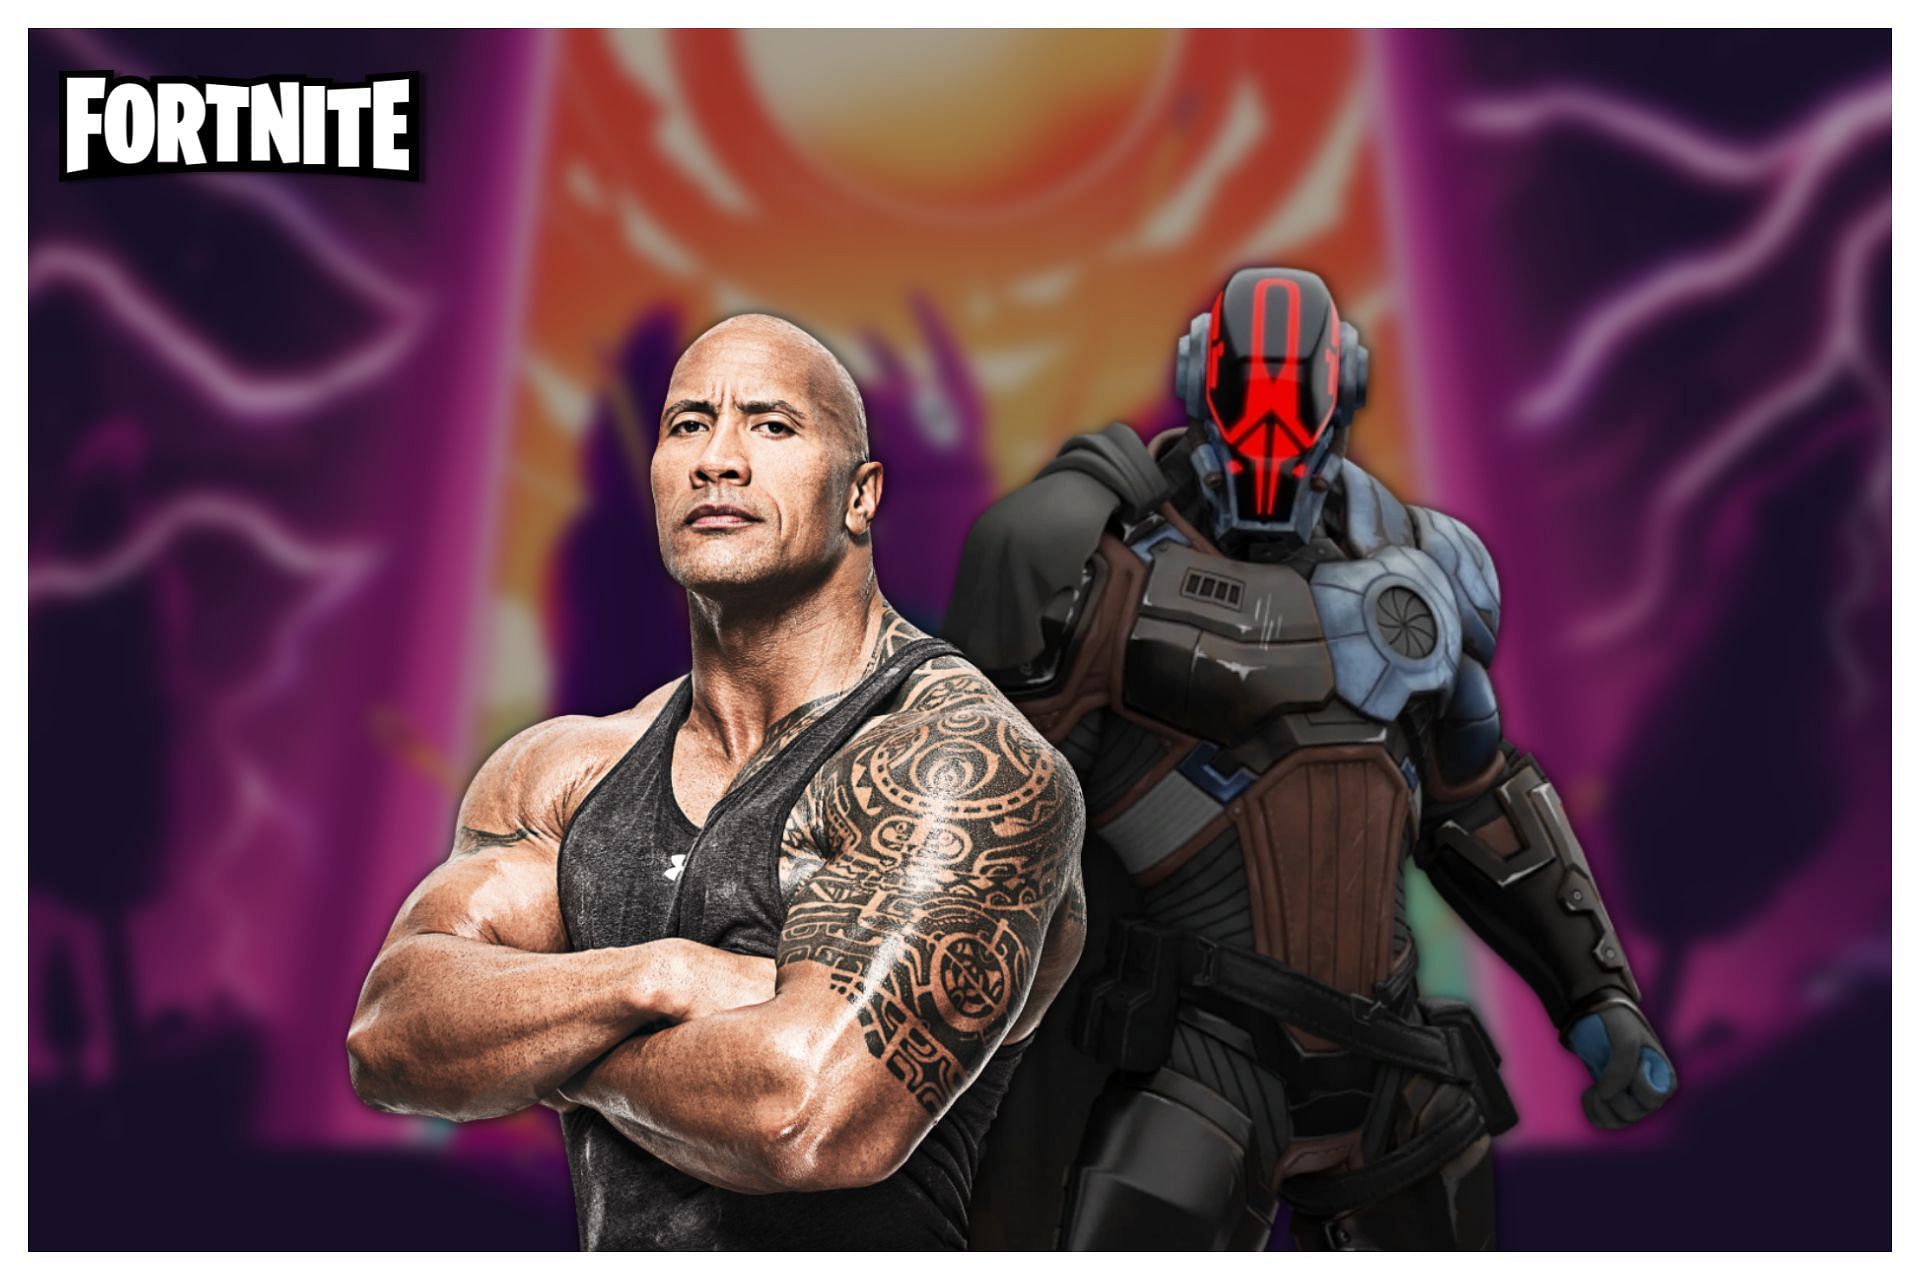 Is The Rock really the voice behind The Foundation in Fortnite? (Image via Sportskeeda)